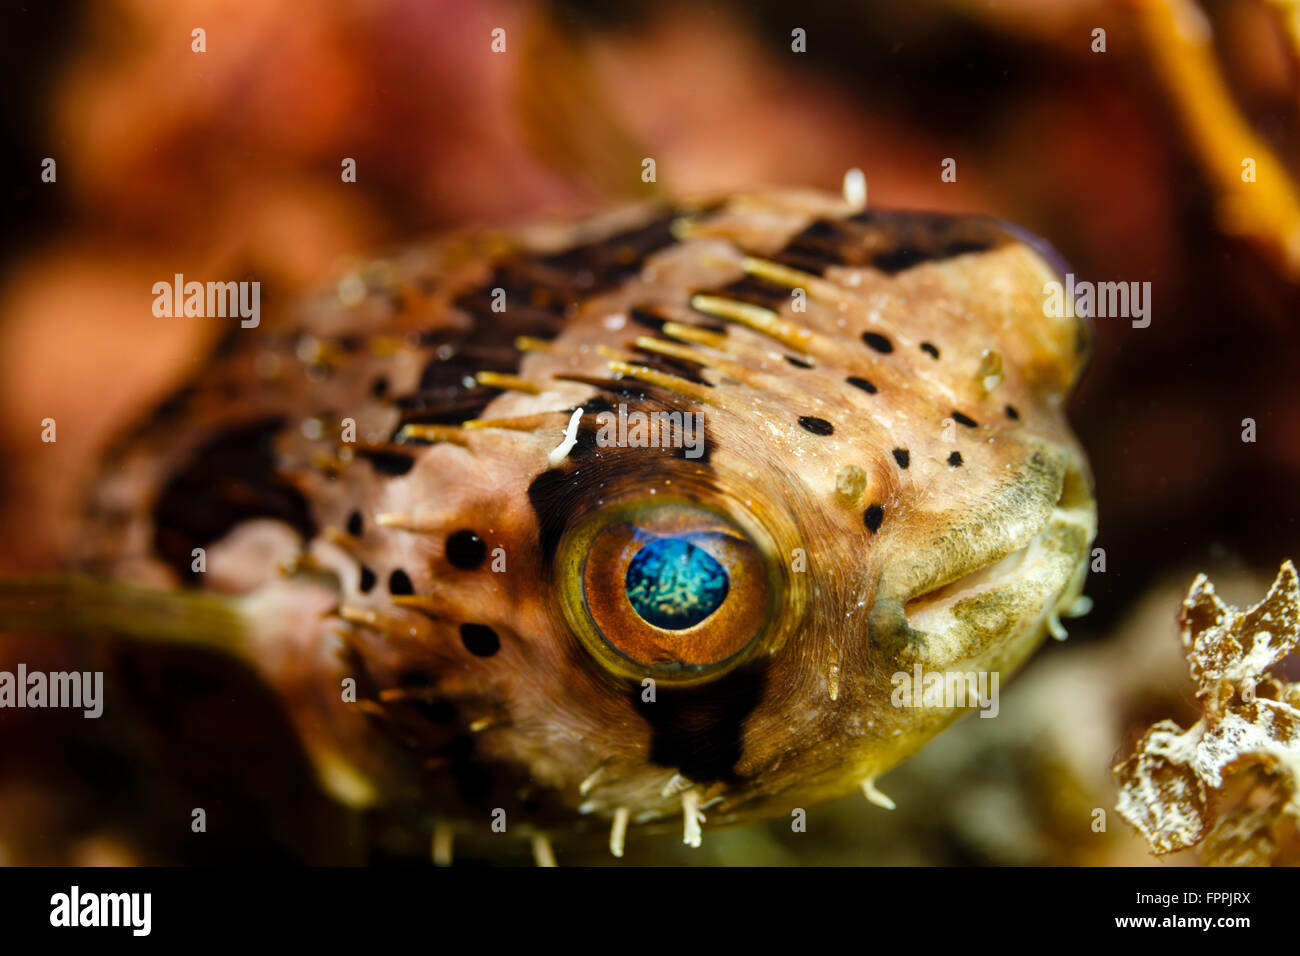 Closeup of turquoise eye of black and white spotted Puffer fish Stock Photo